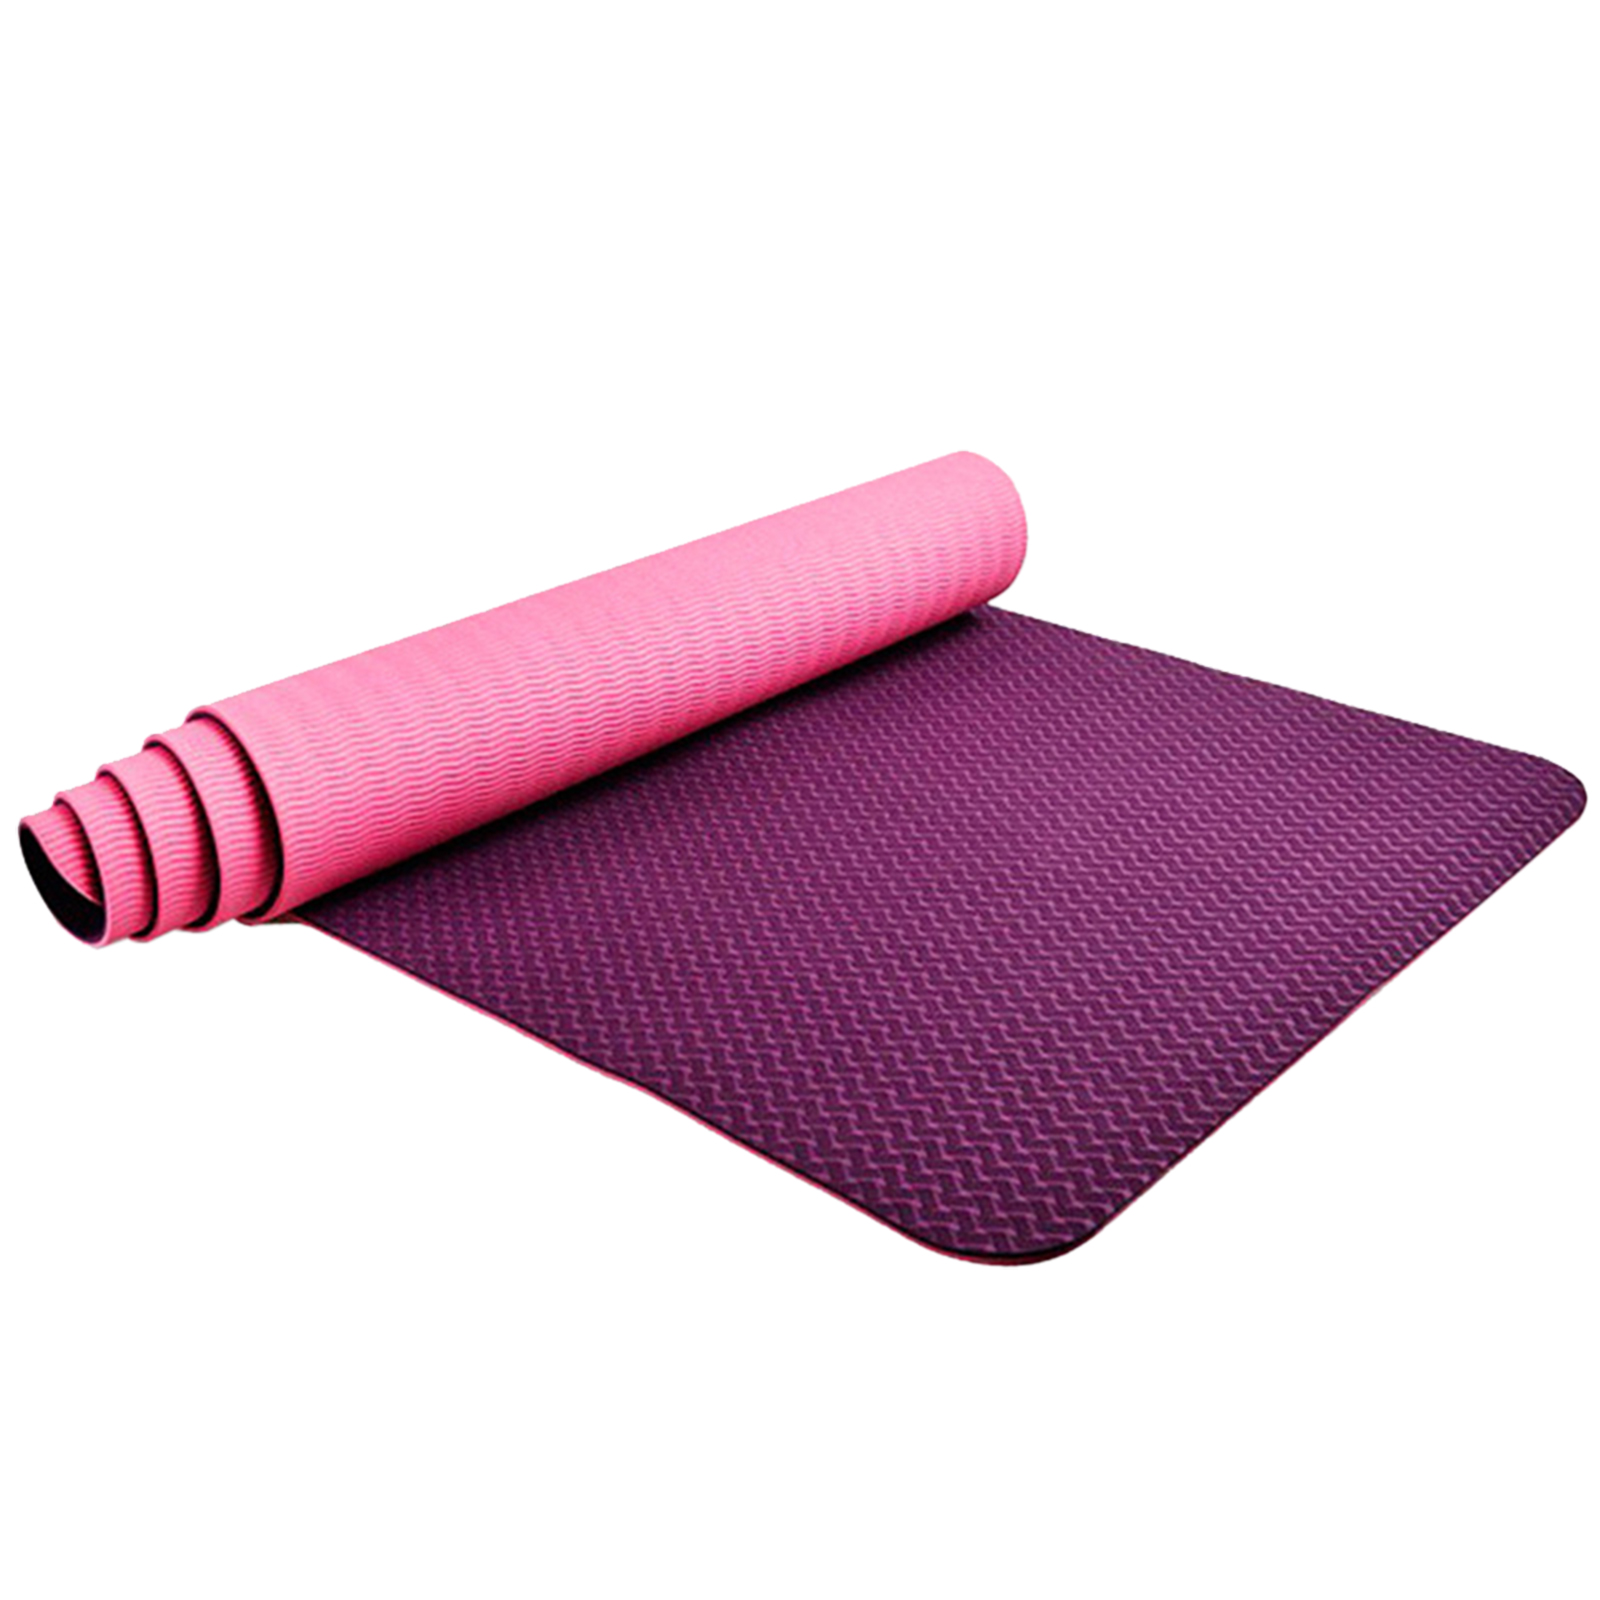 Anti-Slip Yoga Mat Lightweight 6mm Eco-friendly Fitness Mat With Carry Strap For Home Workout Travel Two-color blue 183 x 61 x 0.6cm